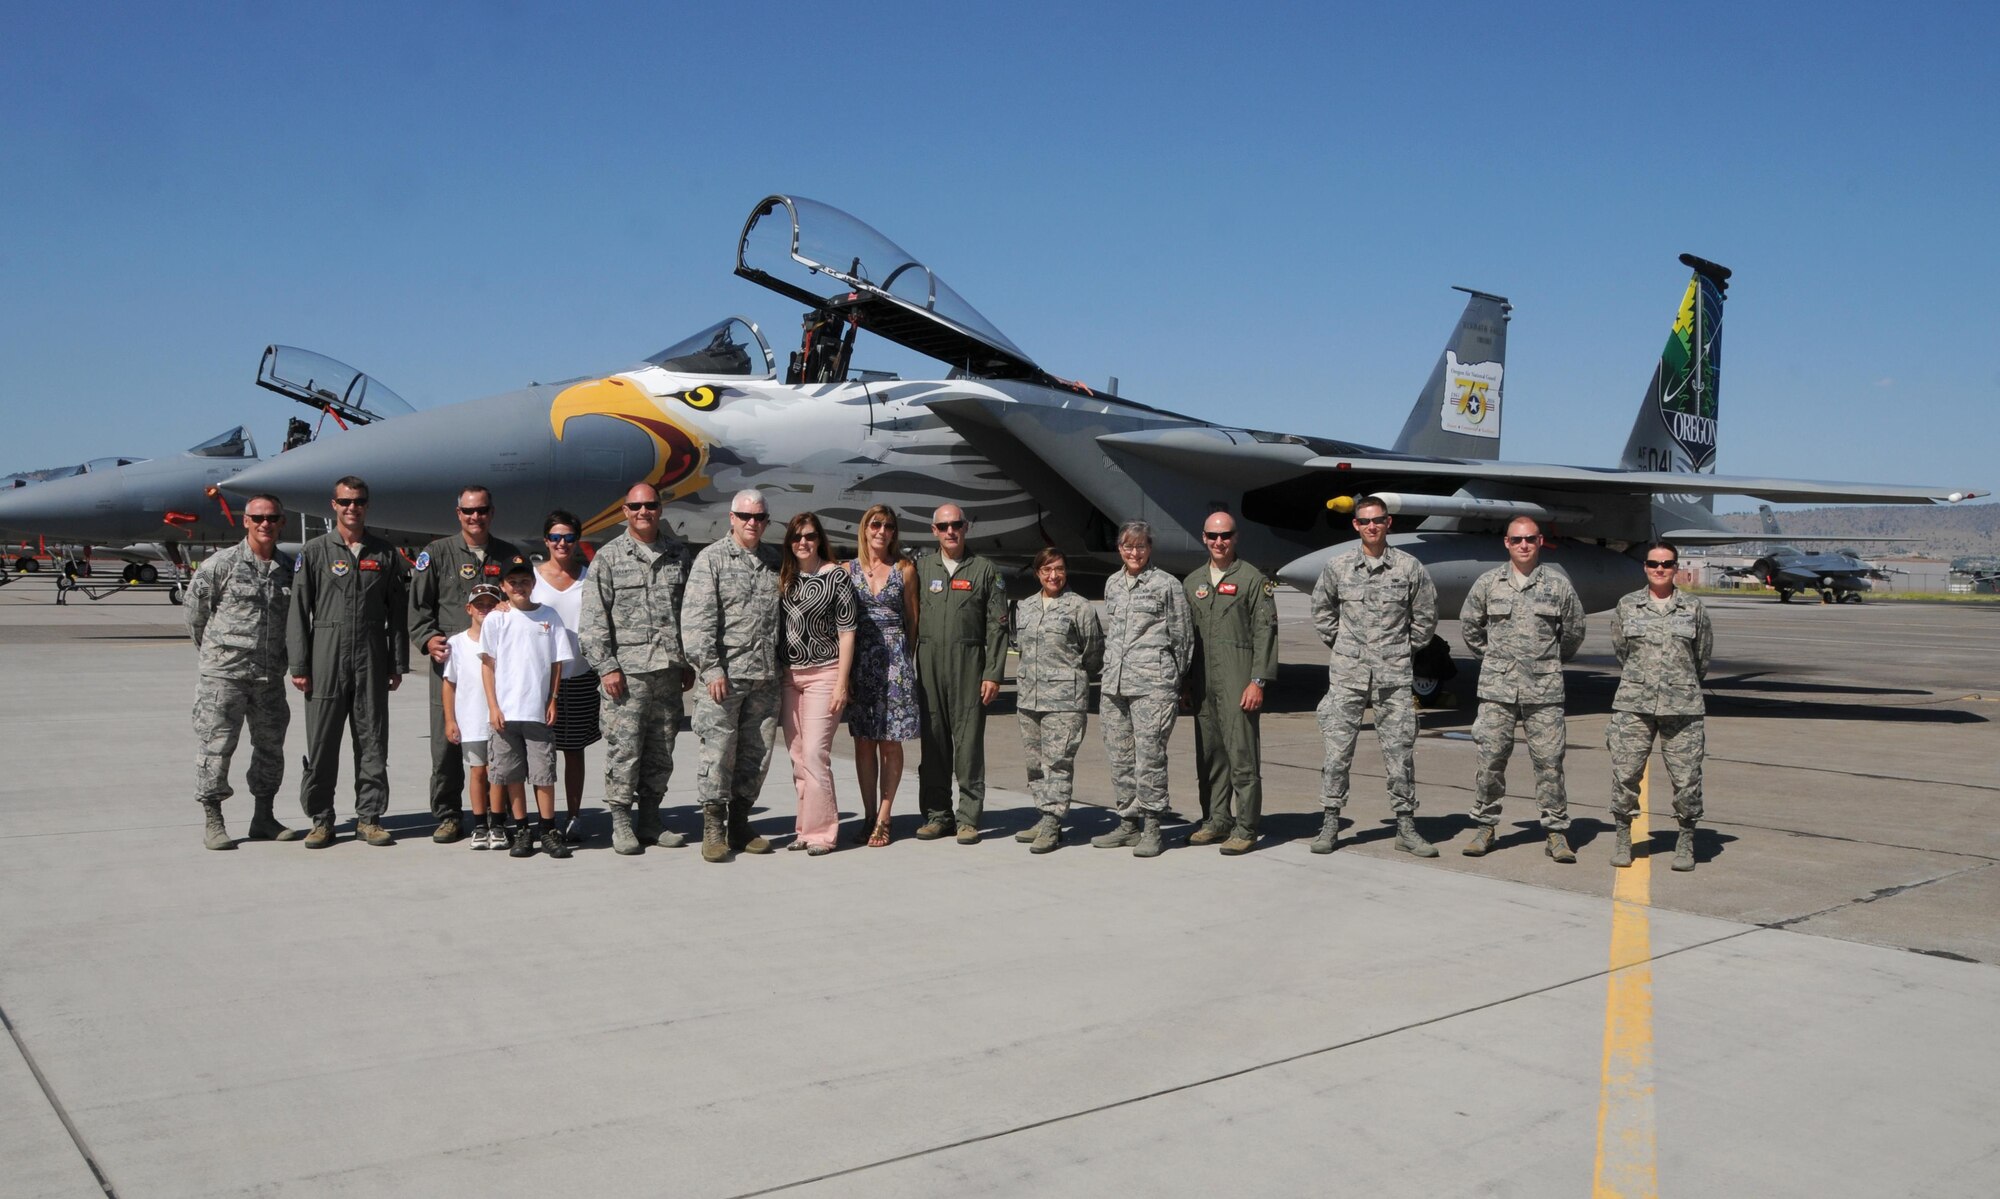 Oregon Air National Guard leadership and the Director of the Air National Guard, Lieutenant General Scott Rice, pose for a group photo in front of a U.S. Air Force F-15 Eagle from the 173rd Fighter Wing during the Sentry Eagle Open House held July 22, 2017 at Kingsley Field in Klamath Falls, Oregon.  Sentry Eagle is a four day large force exercise that brings together different aircraft and units from around the country for dissimilar air combat training.  Additionally, the wing opens its gates to the public for a day during their biennial open house.  (U.S. Air National Guard photo by Master Sgt. Jennifer Shirar)